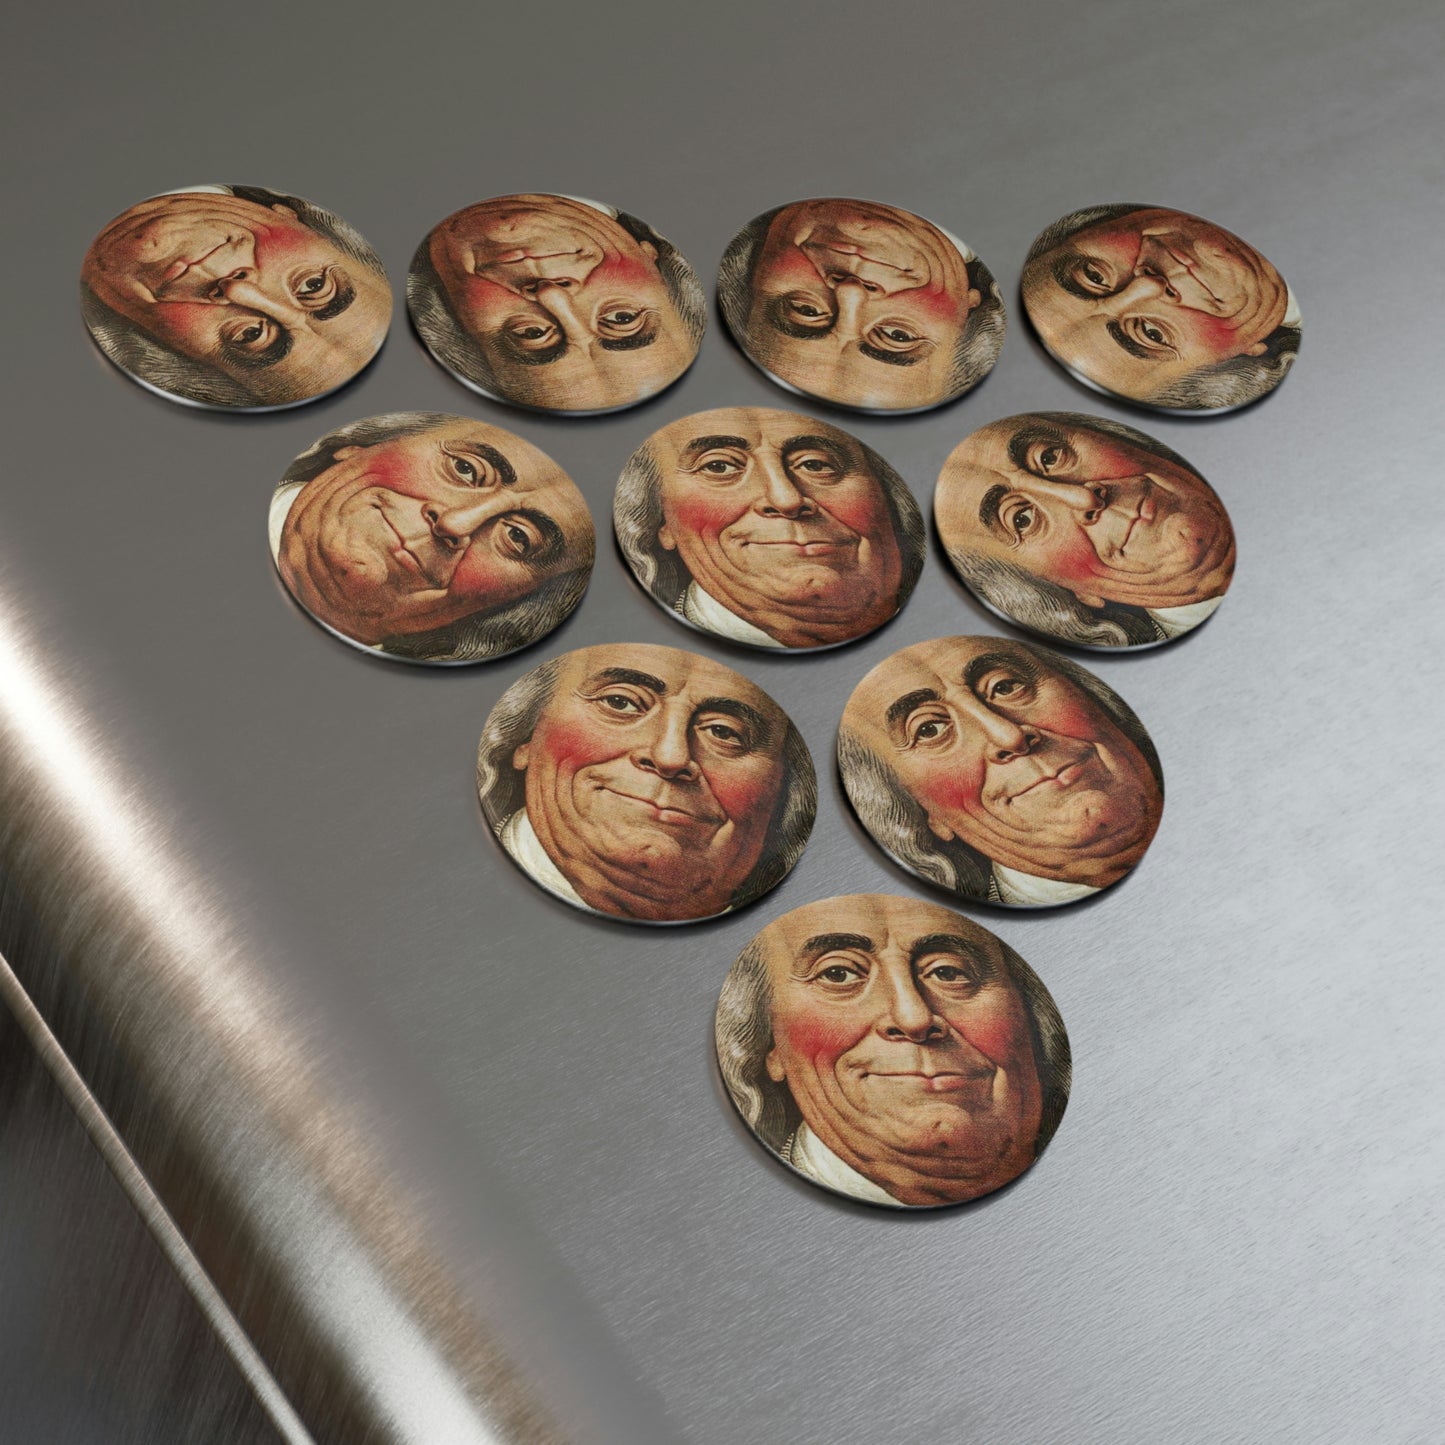 Ben Franklin's Magnetic Bill Hangers: Organize Your Finances with Style